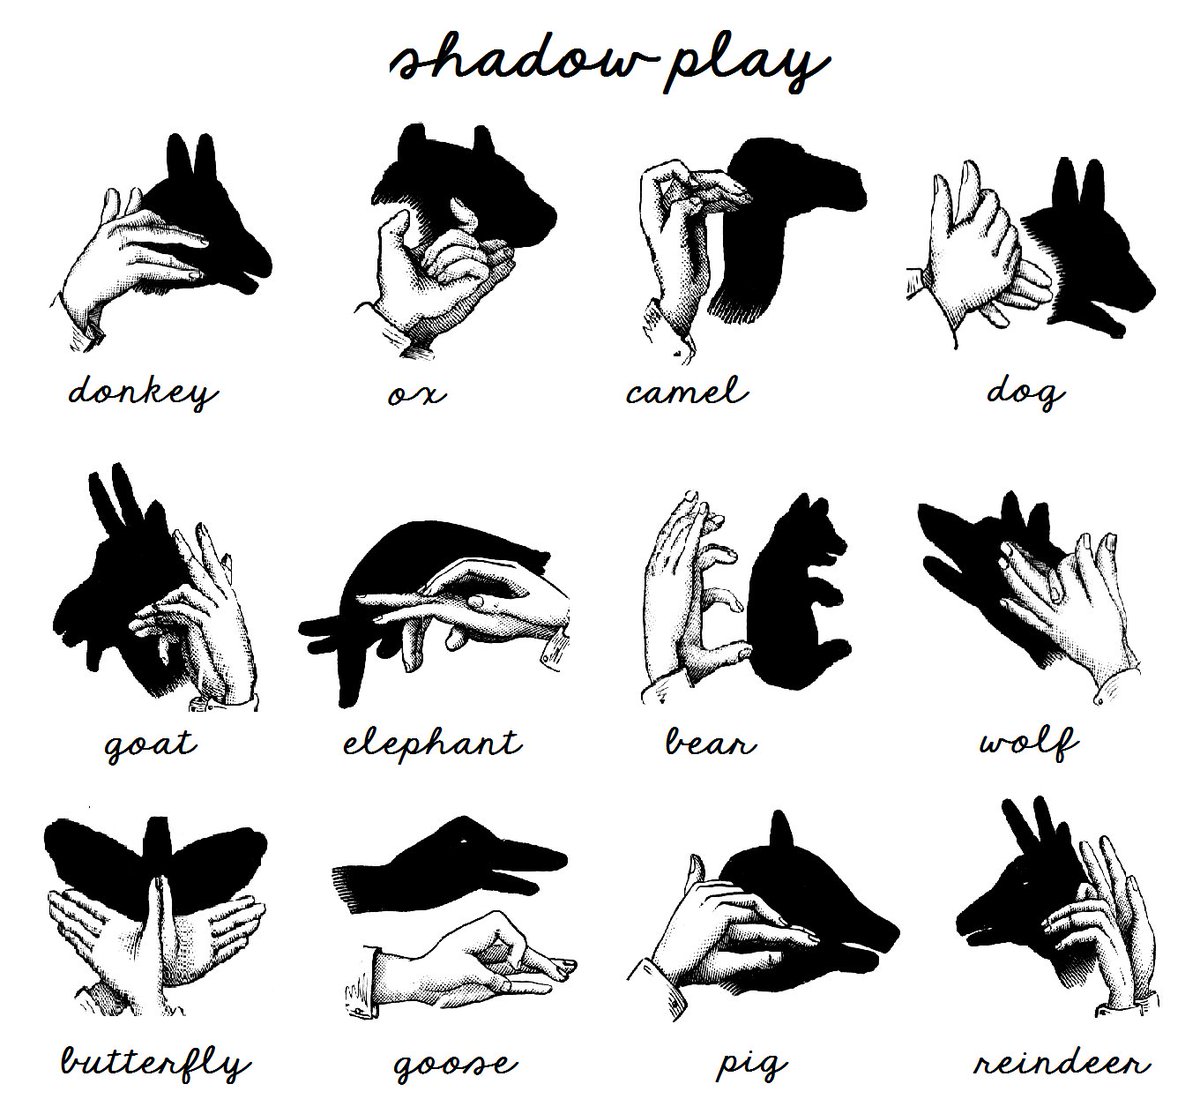 Useful how-to guide for shadow puppets..  https://t.co/5VCqABSJzB https://t.co/yE5alrXnSn